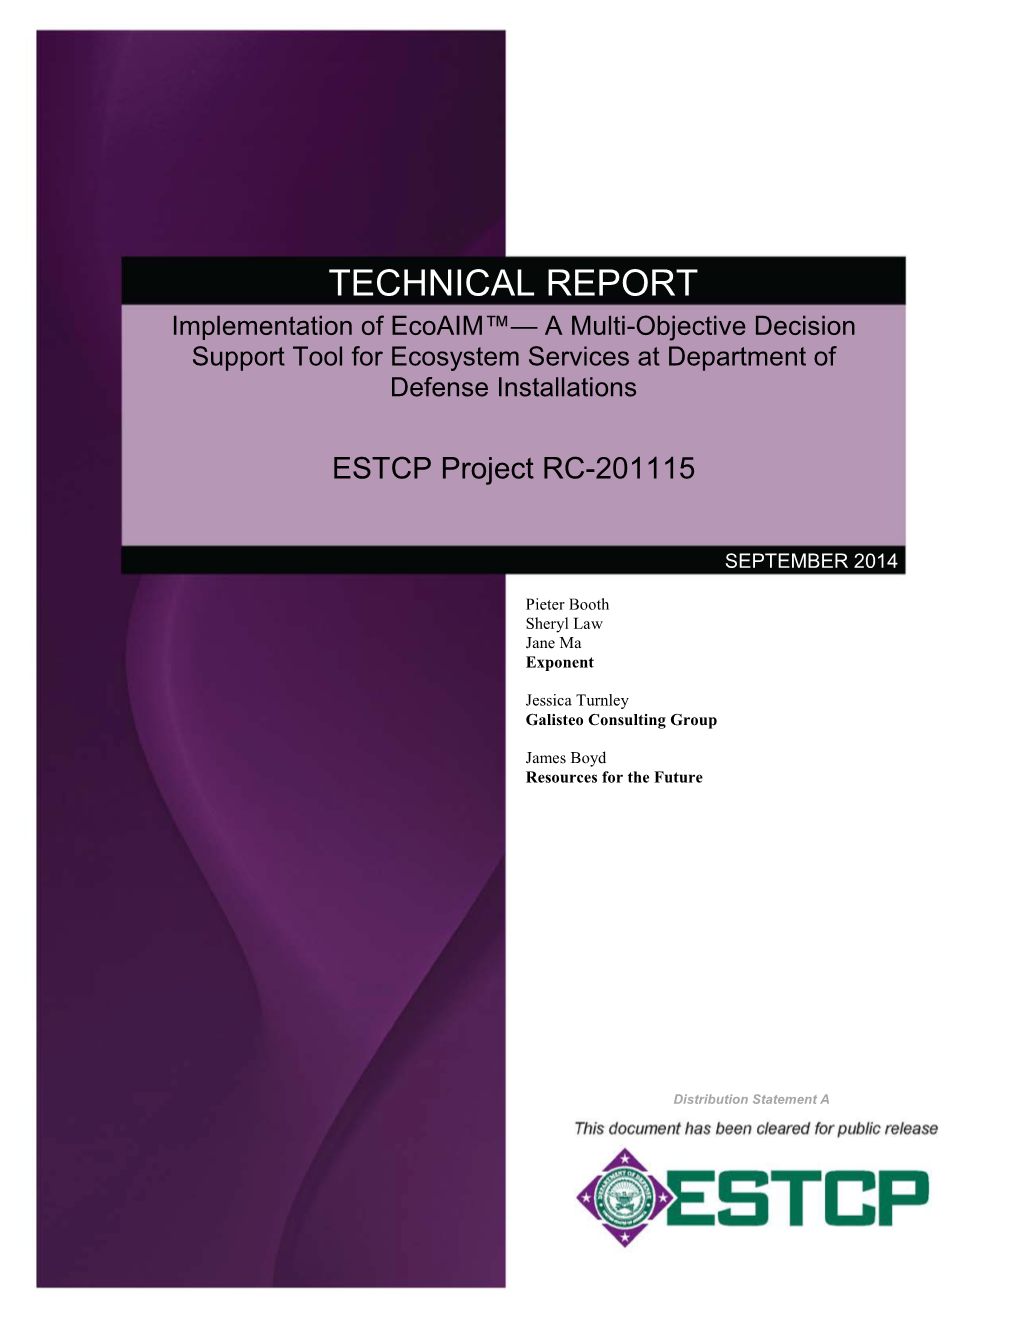 TECHNICAL REPORT Implementation of Ecoaim™— a Multi-Objective Decision Support Tool for Ecosystem Services at Department of Defense Installations